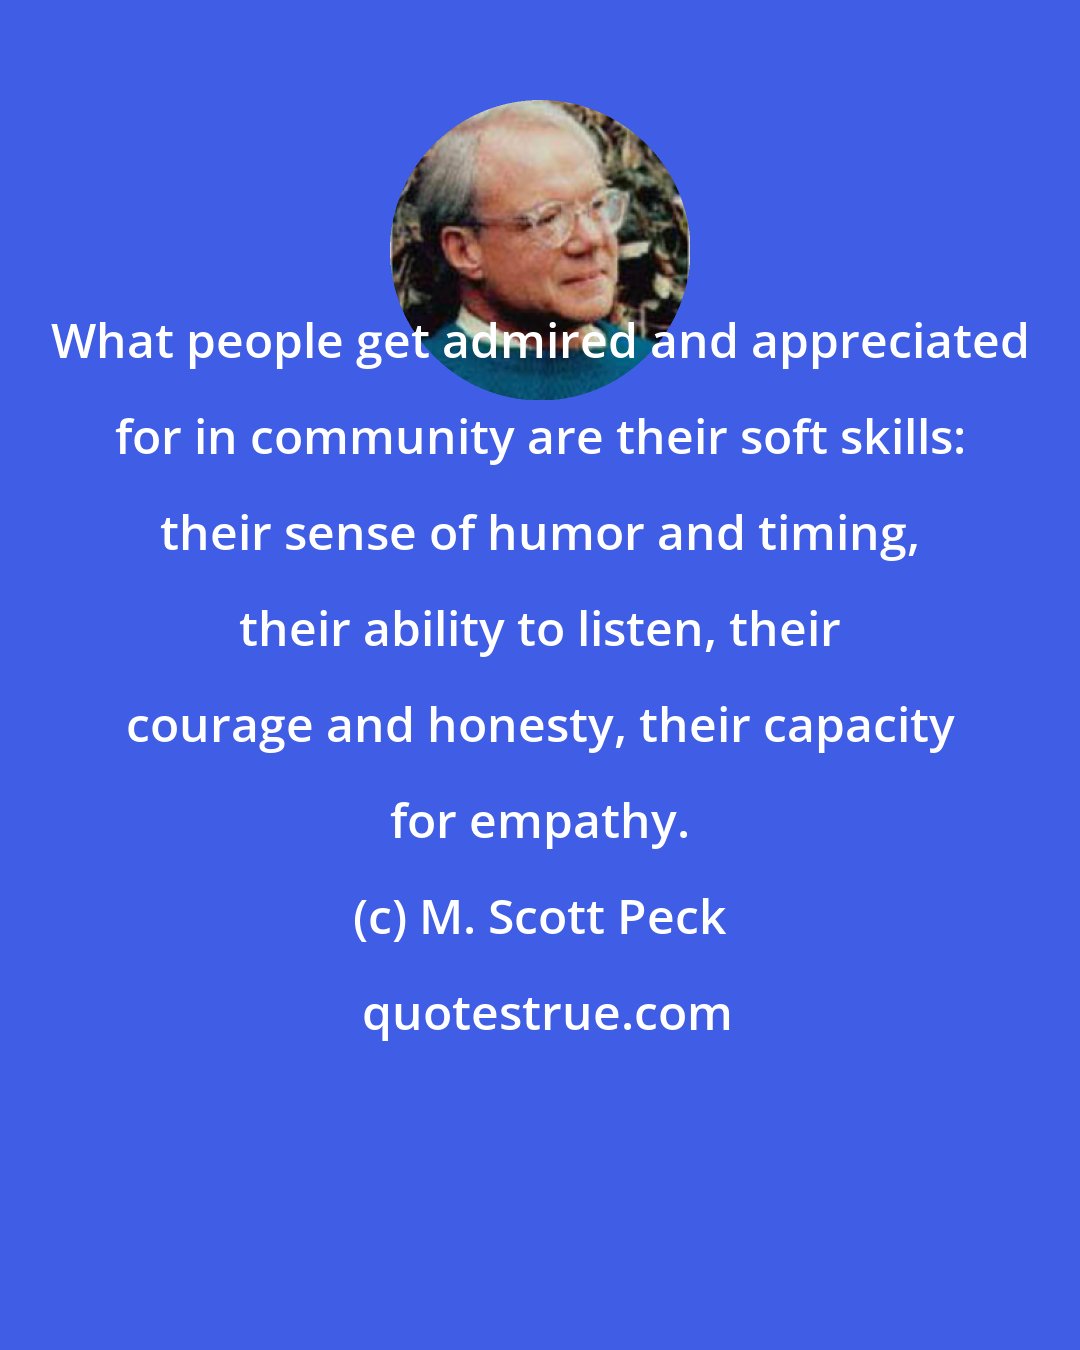 M. Scott Peck: What people get admired and appreciated for in community are their soft skills: their sense of humor and timing, their ability to listen, their courage and honesty, their capacity for empathy.